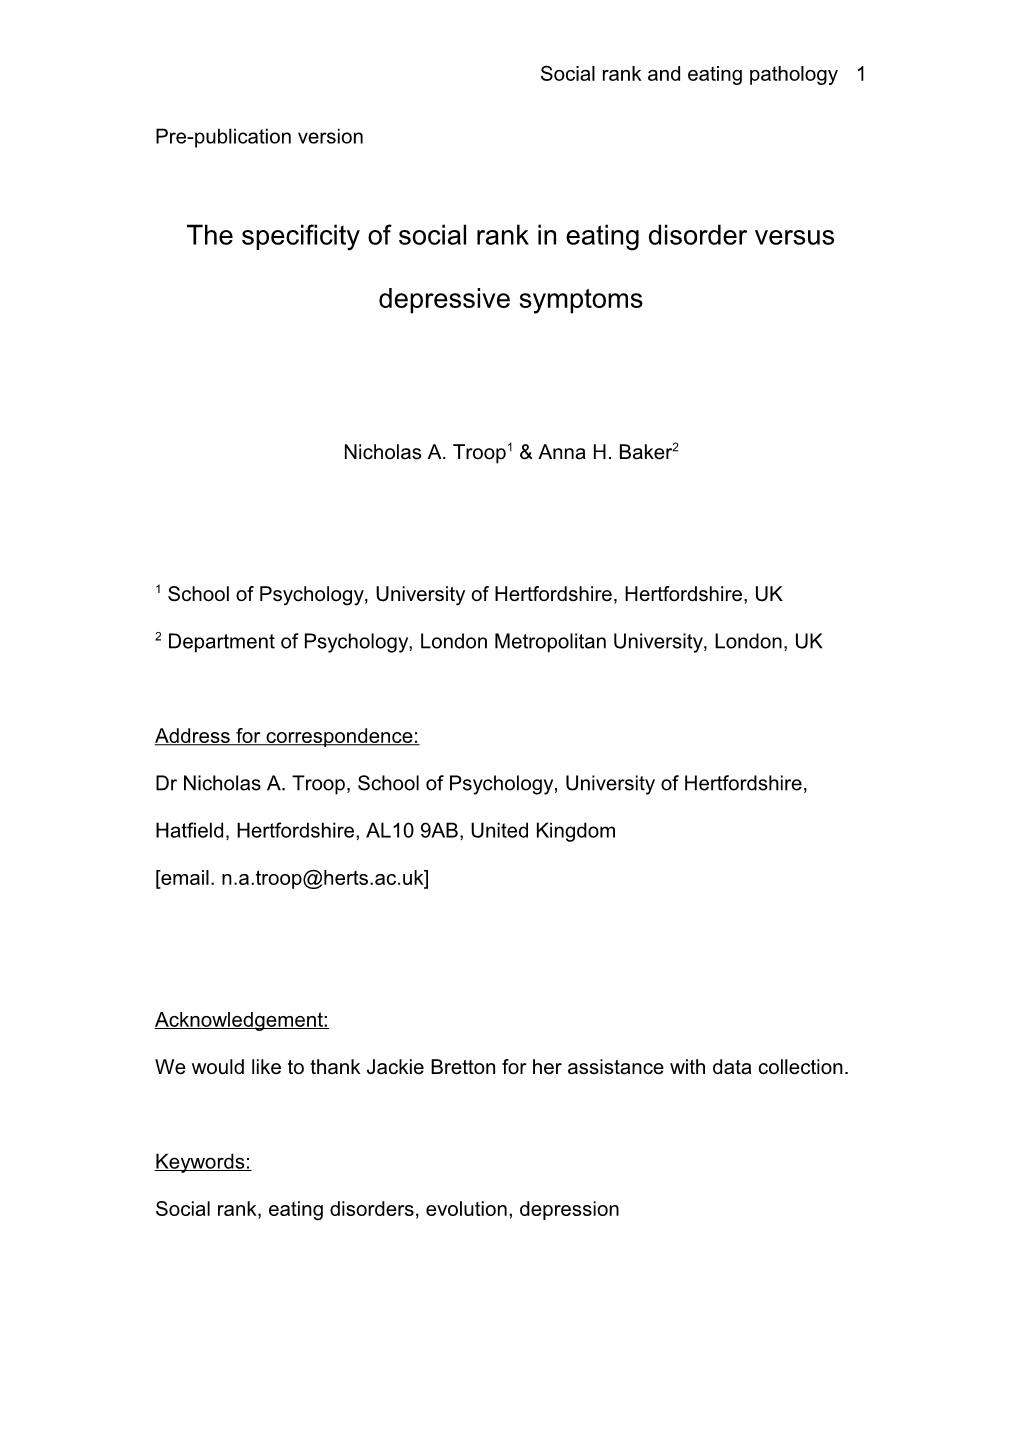 Depressive Versus Eating Disorder Symptoms and Ranking Theory in a Non-Clinical Sample